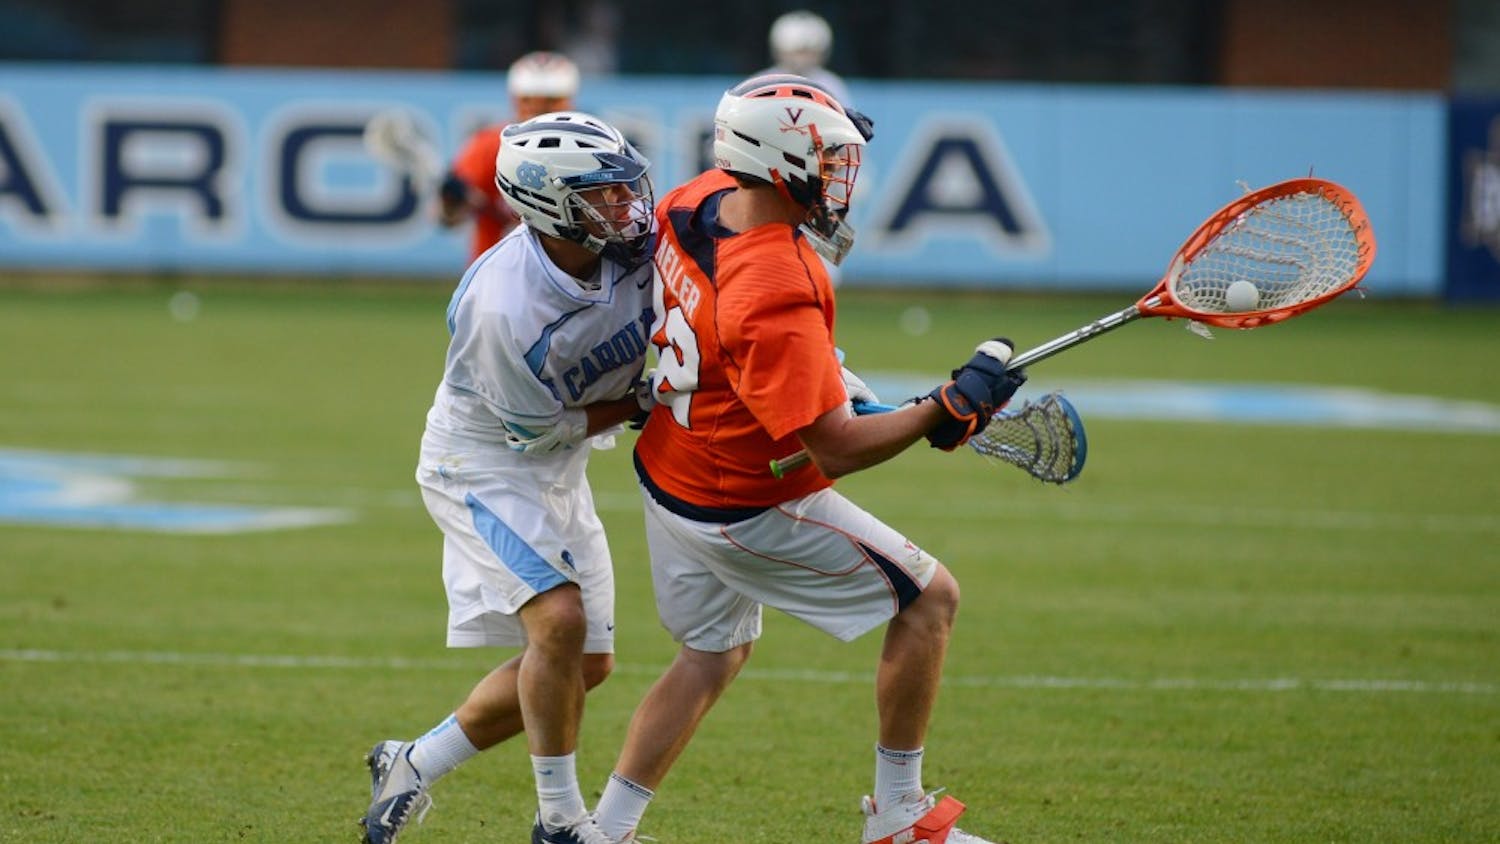 UNC attacker Jimmy Bitter (4) forces a turnover from Virginia goalkeeper Rhody Heller (42).